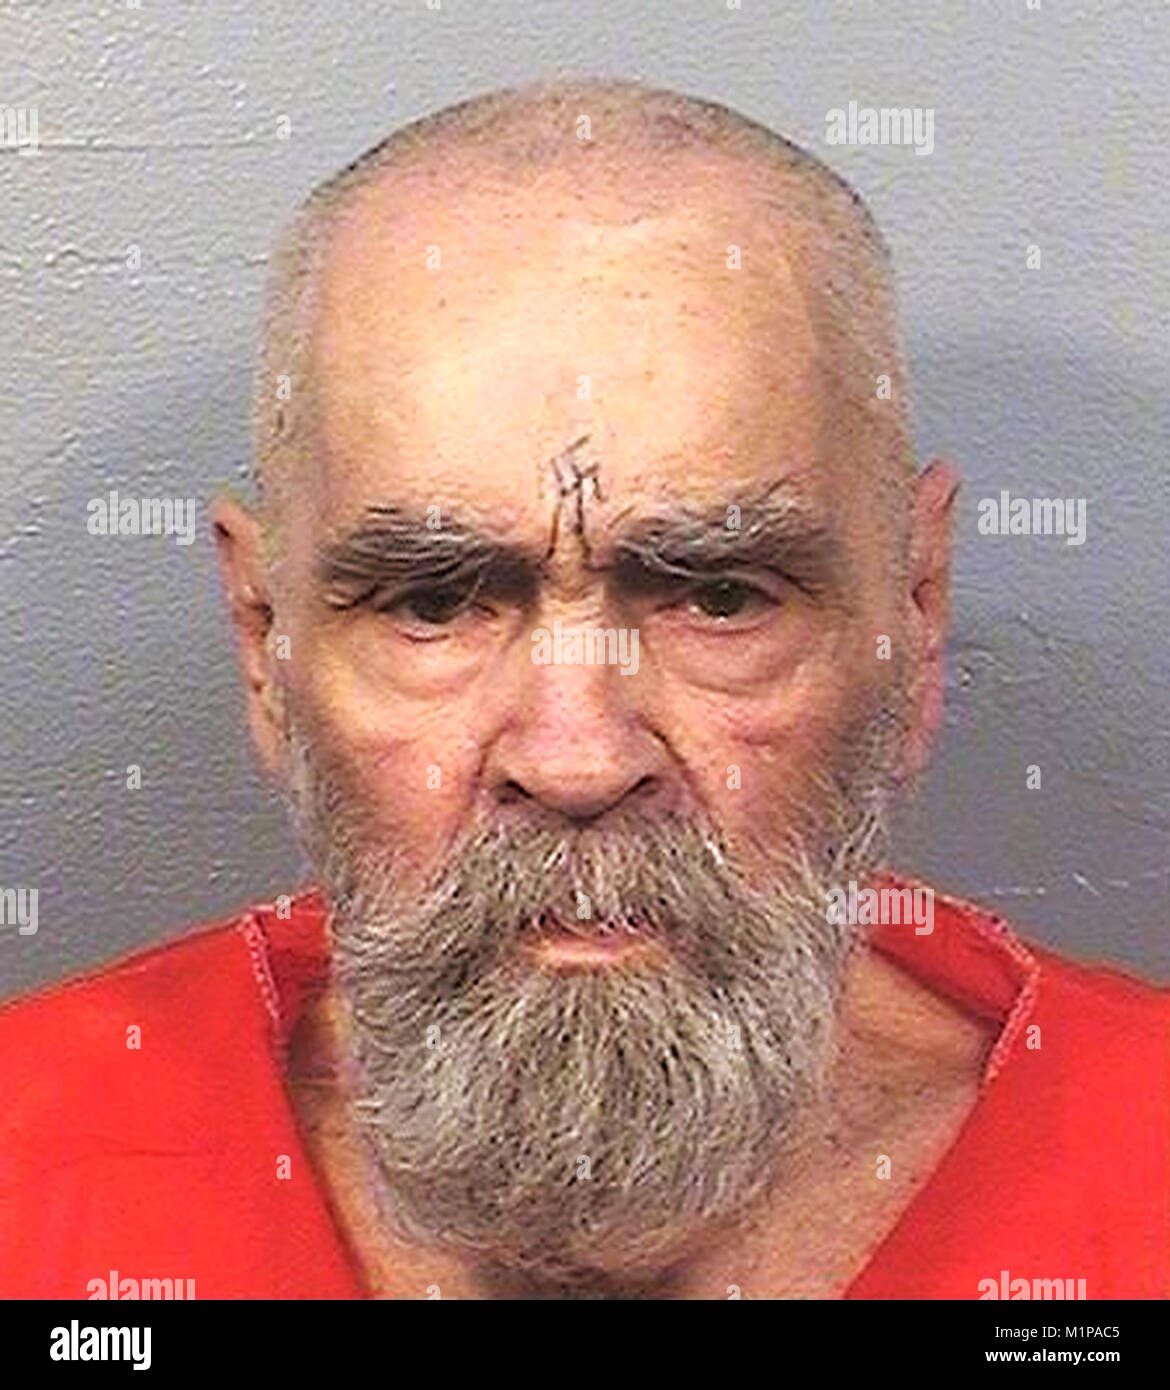 Charles Milles Manson (1934 – 2017) American criminal and cult leader. Stock Photo